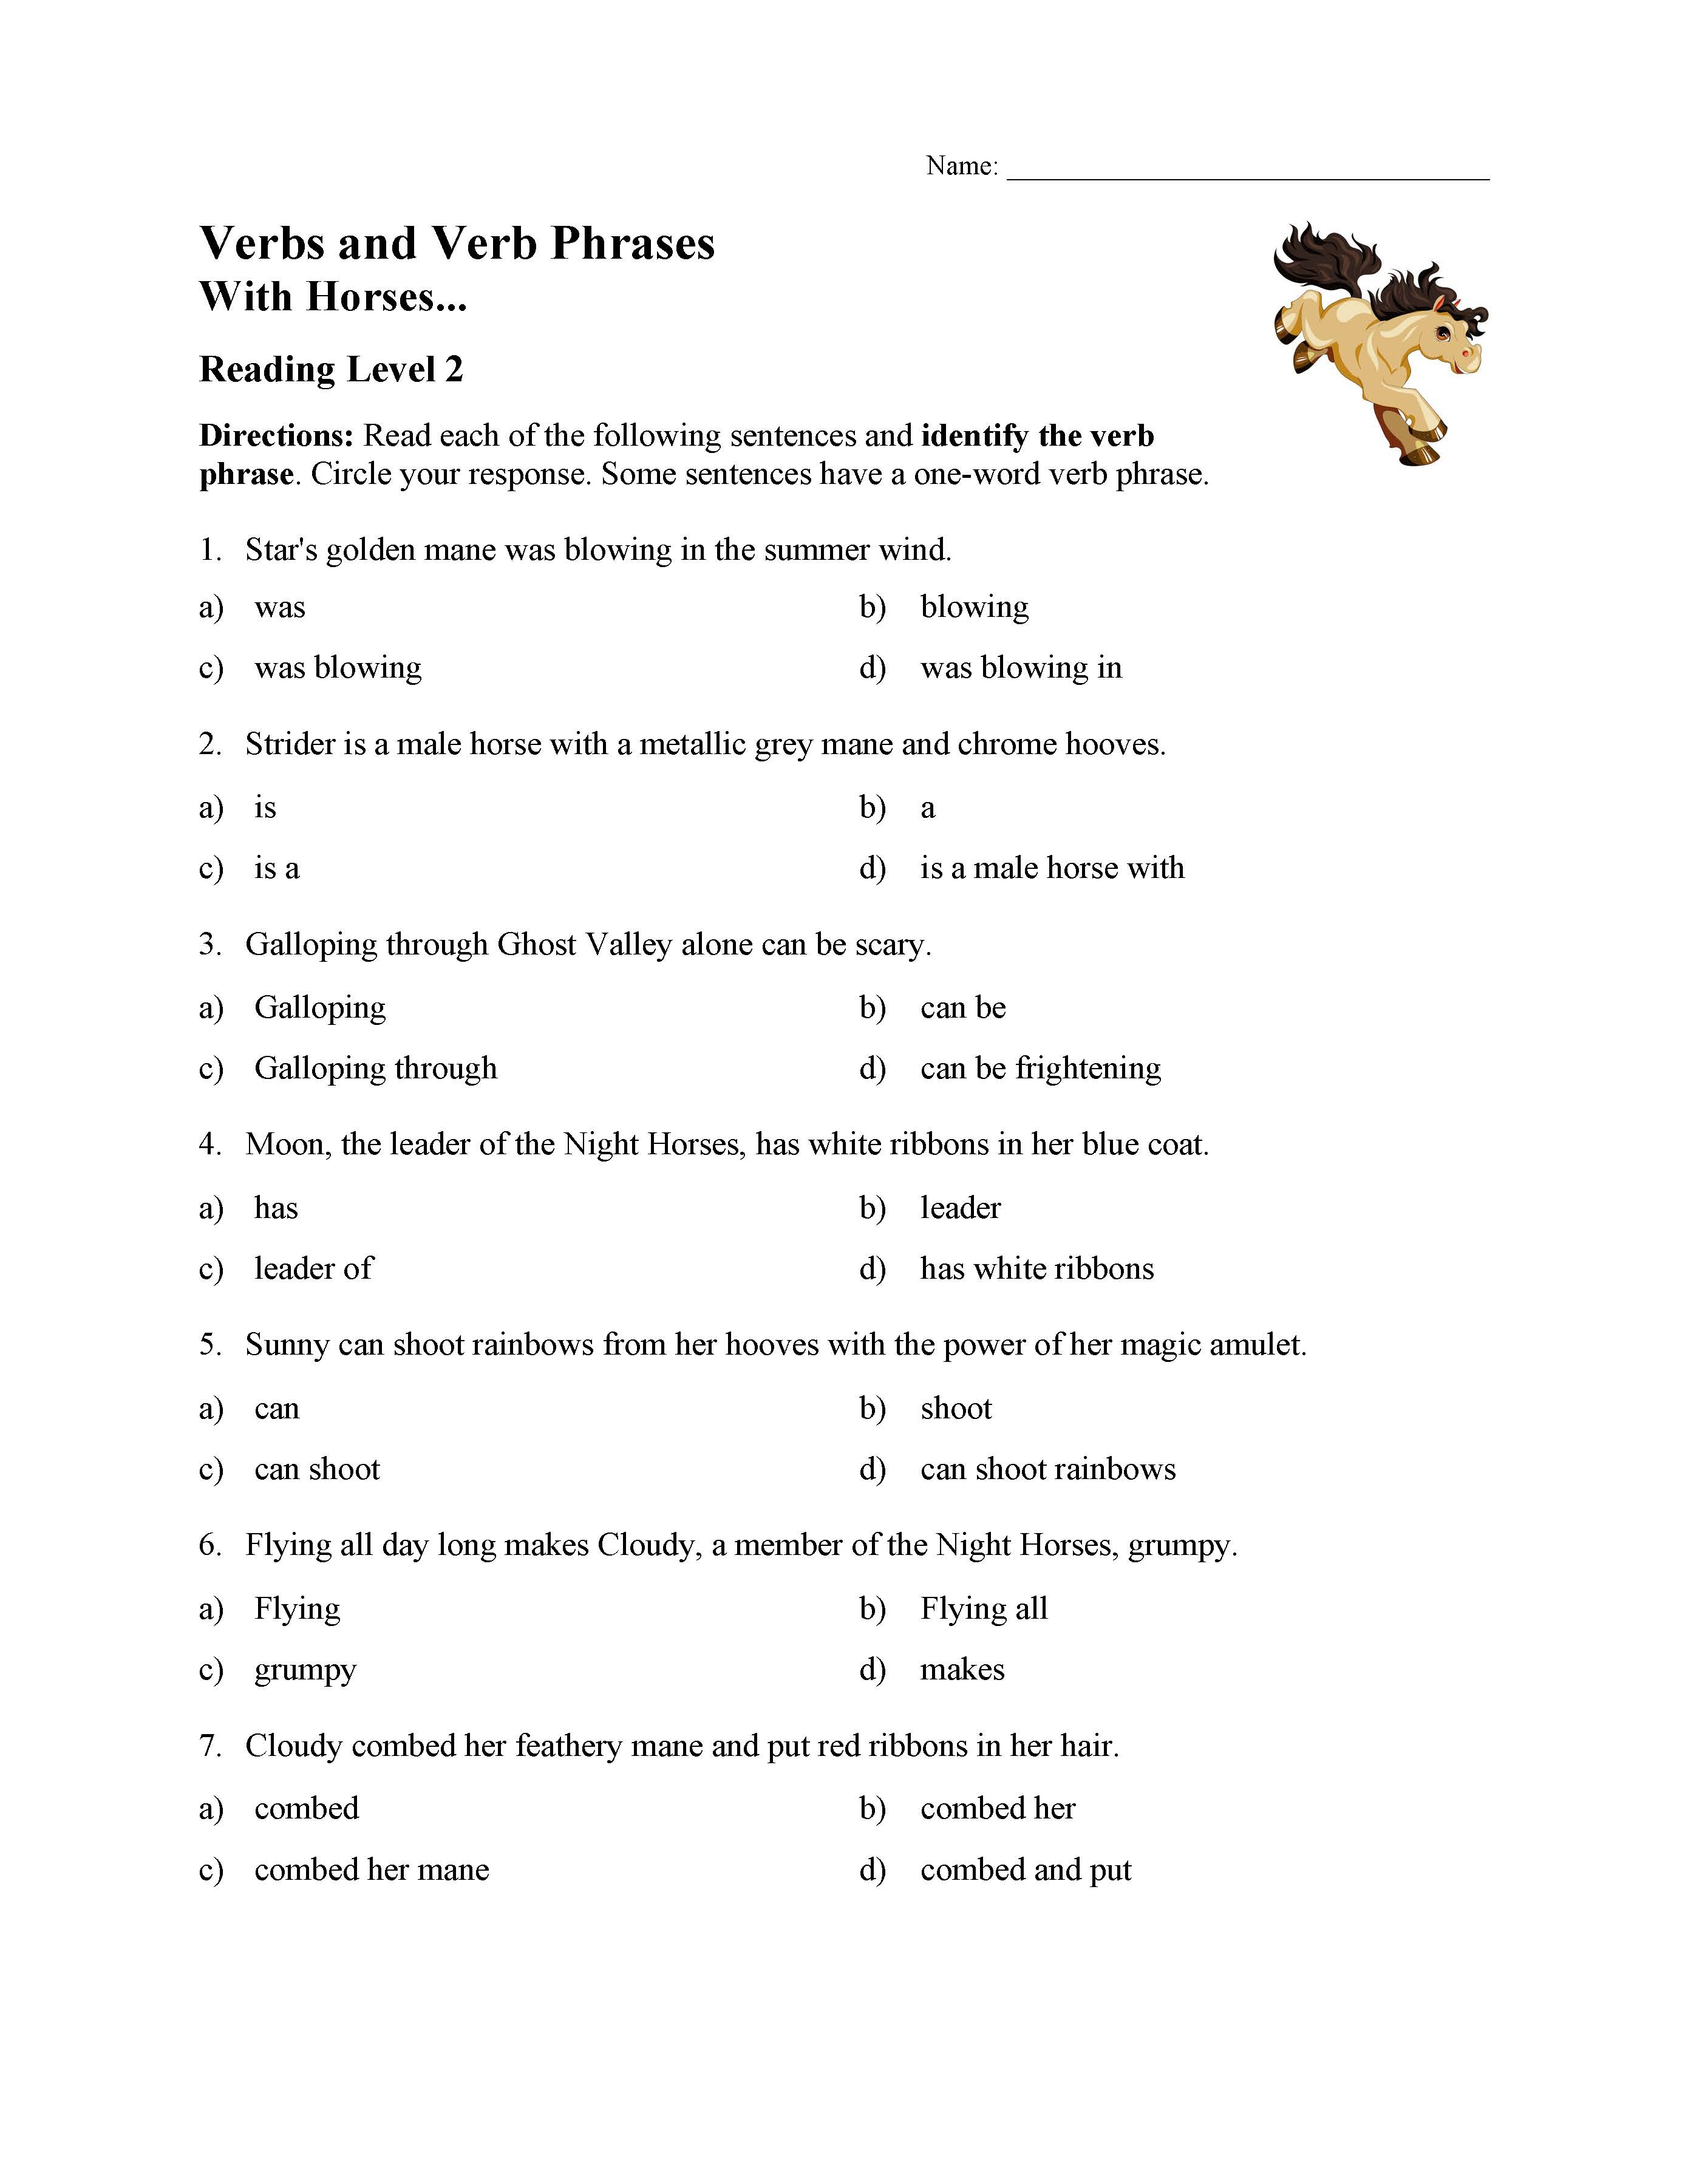 Verb Phrases Test With Horses Reading Level 2 Preview